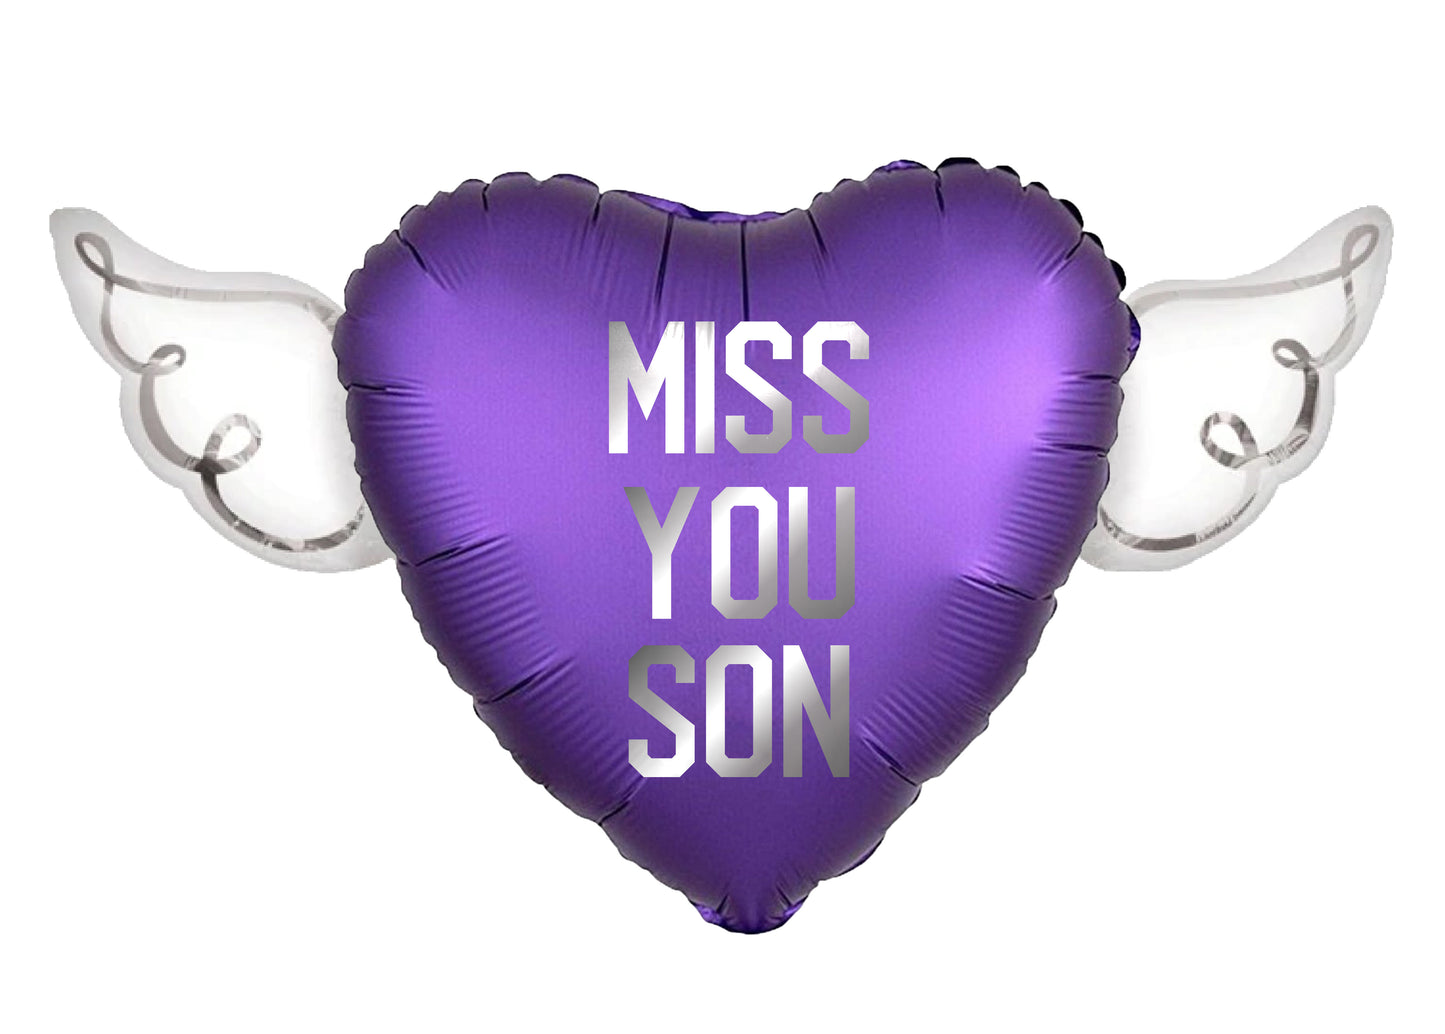 Miss You Son Heavenly Balloons Heart Shaped with angel wings (Purple)